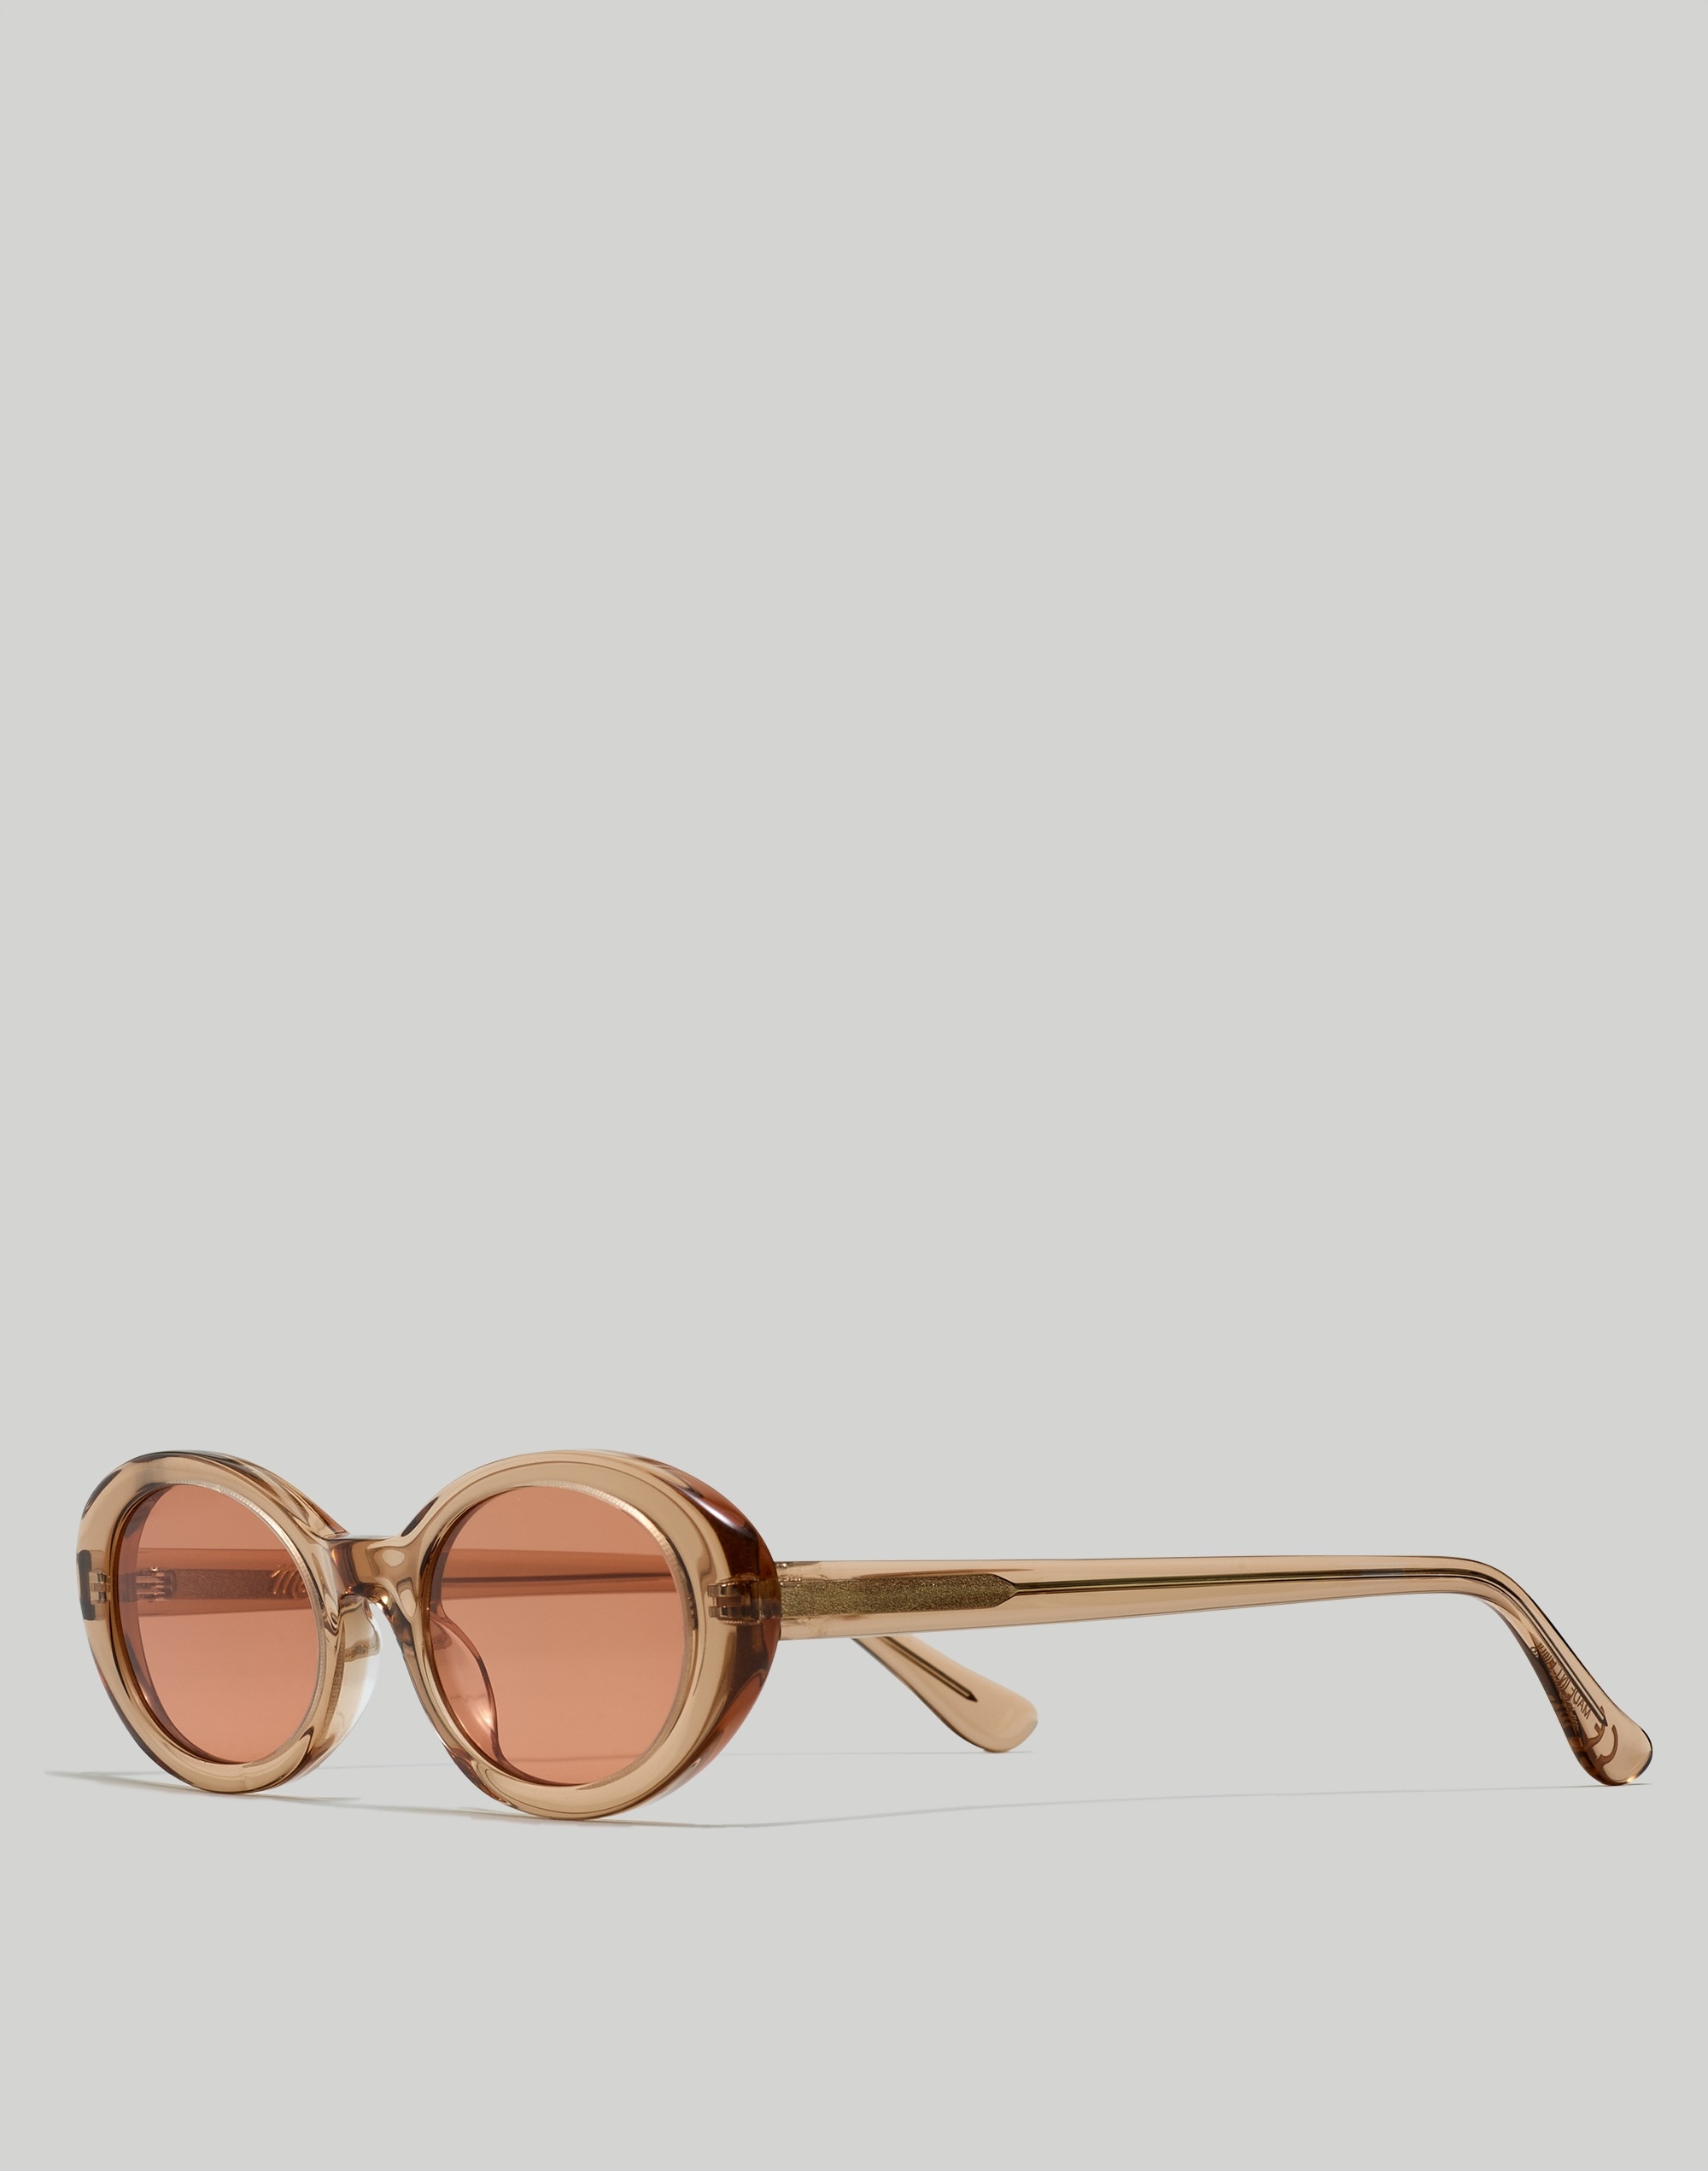 Mw Russell Oval Sunglasses In Marzipan